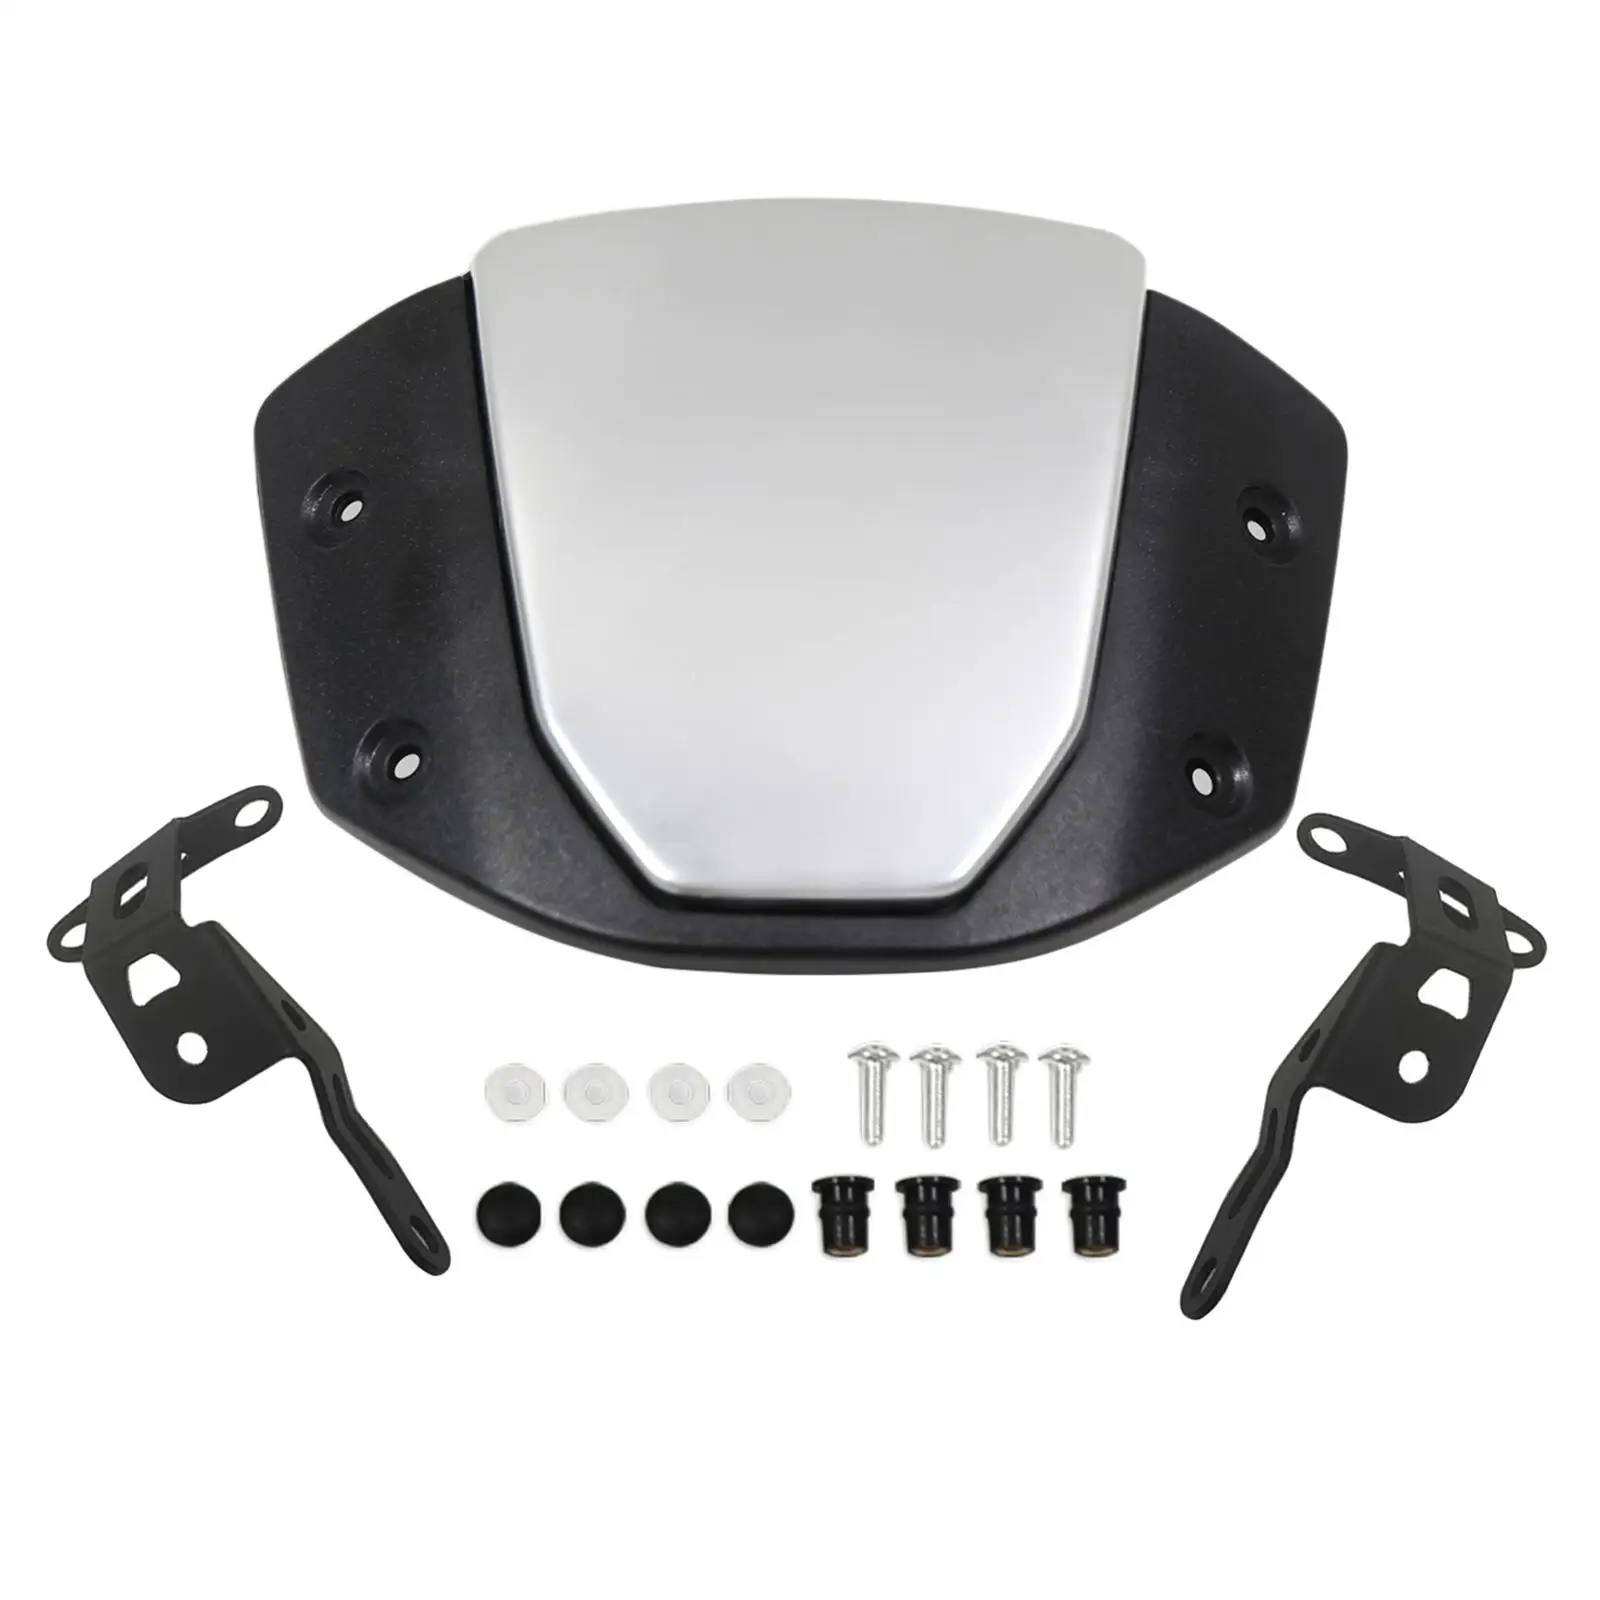 Motorbike Motorcycle Windshield Windscreen  000R Replaces Durable Sturdy High Performance